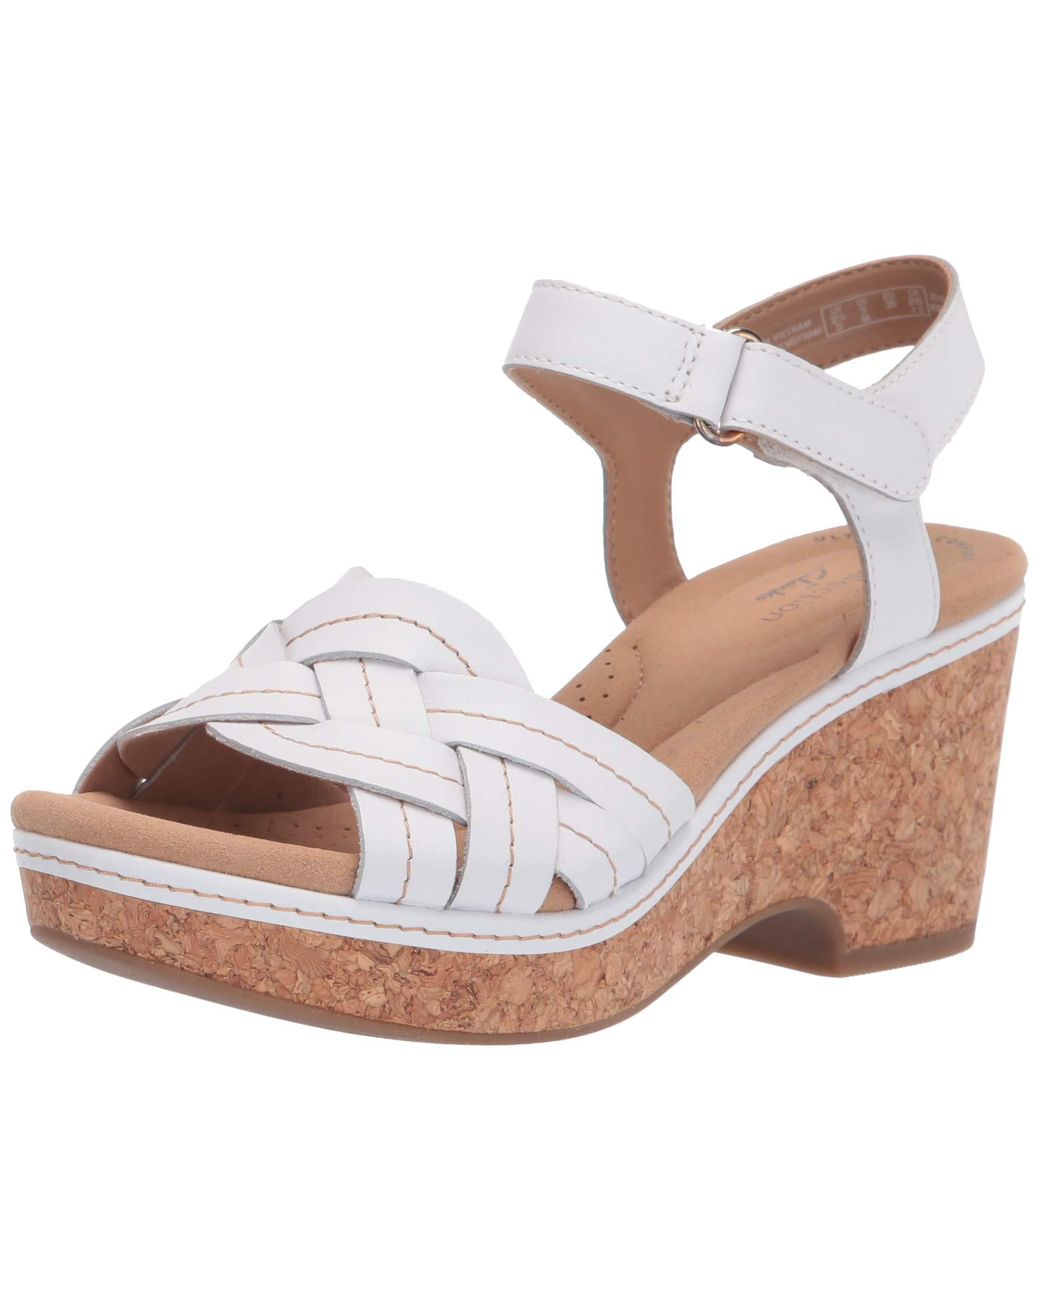 Clarks Giselle Coast Wedge Sandal in White Leather (White) - Save 24% ...